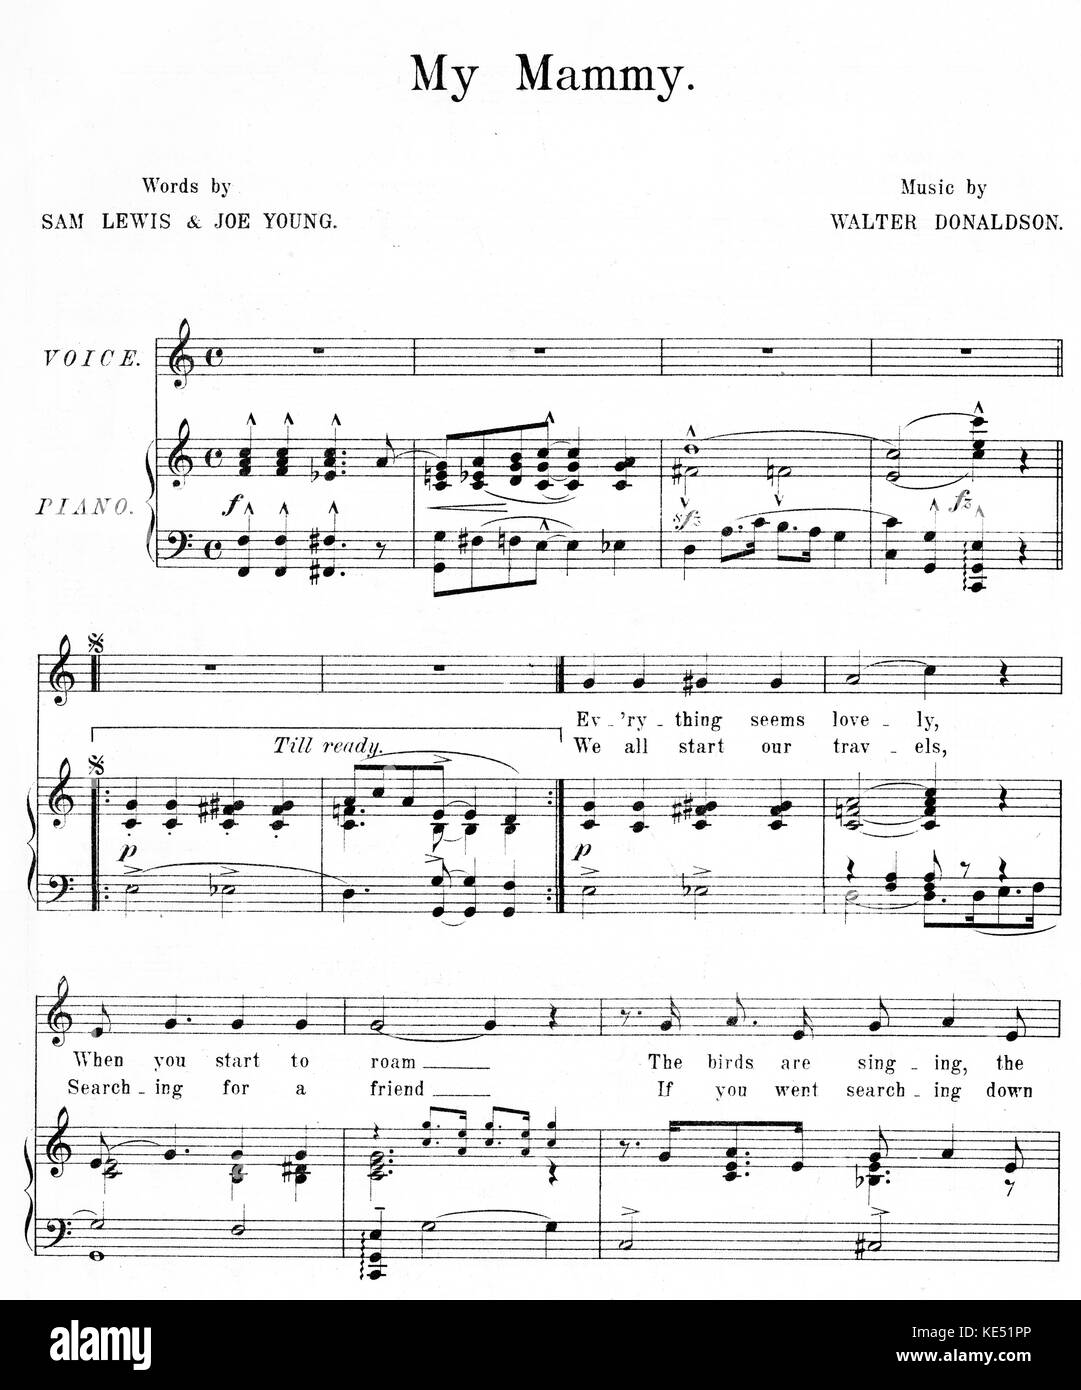 'My Mammy' - song composed by Walter Donaldson. Score. Published: London, Herman Darewski - New York, Irving Berlin, 1921. Song made famous by Al Jolson, American actor and singer. Words by Sam Lewis & Joe Young. Stock Photo